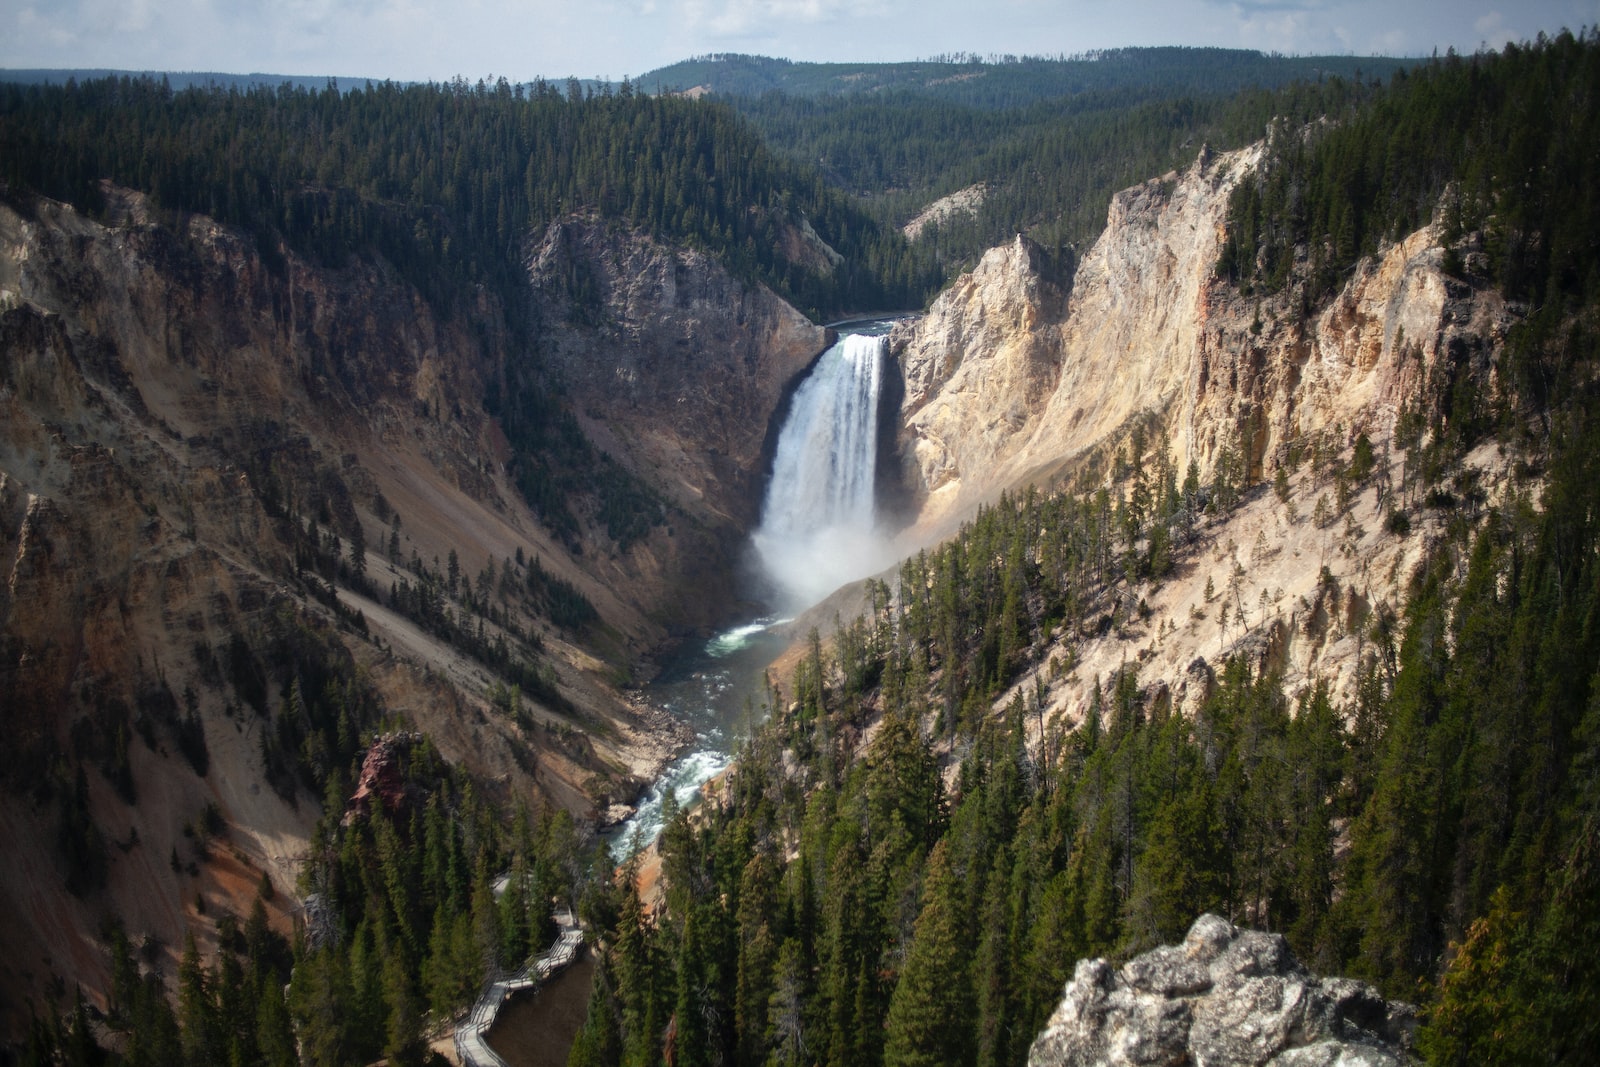 Rapid City to Yellowstone National Park Distance, Drive Hours, Stops